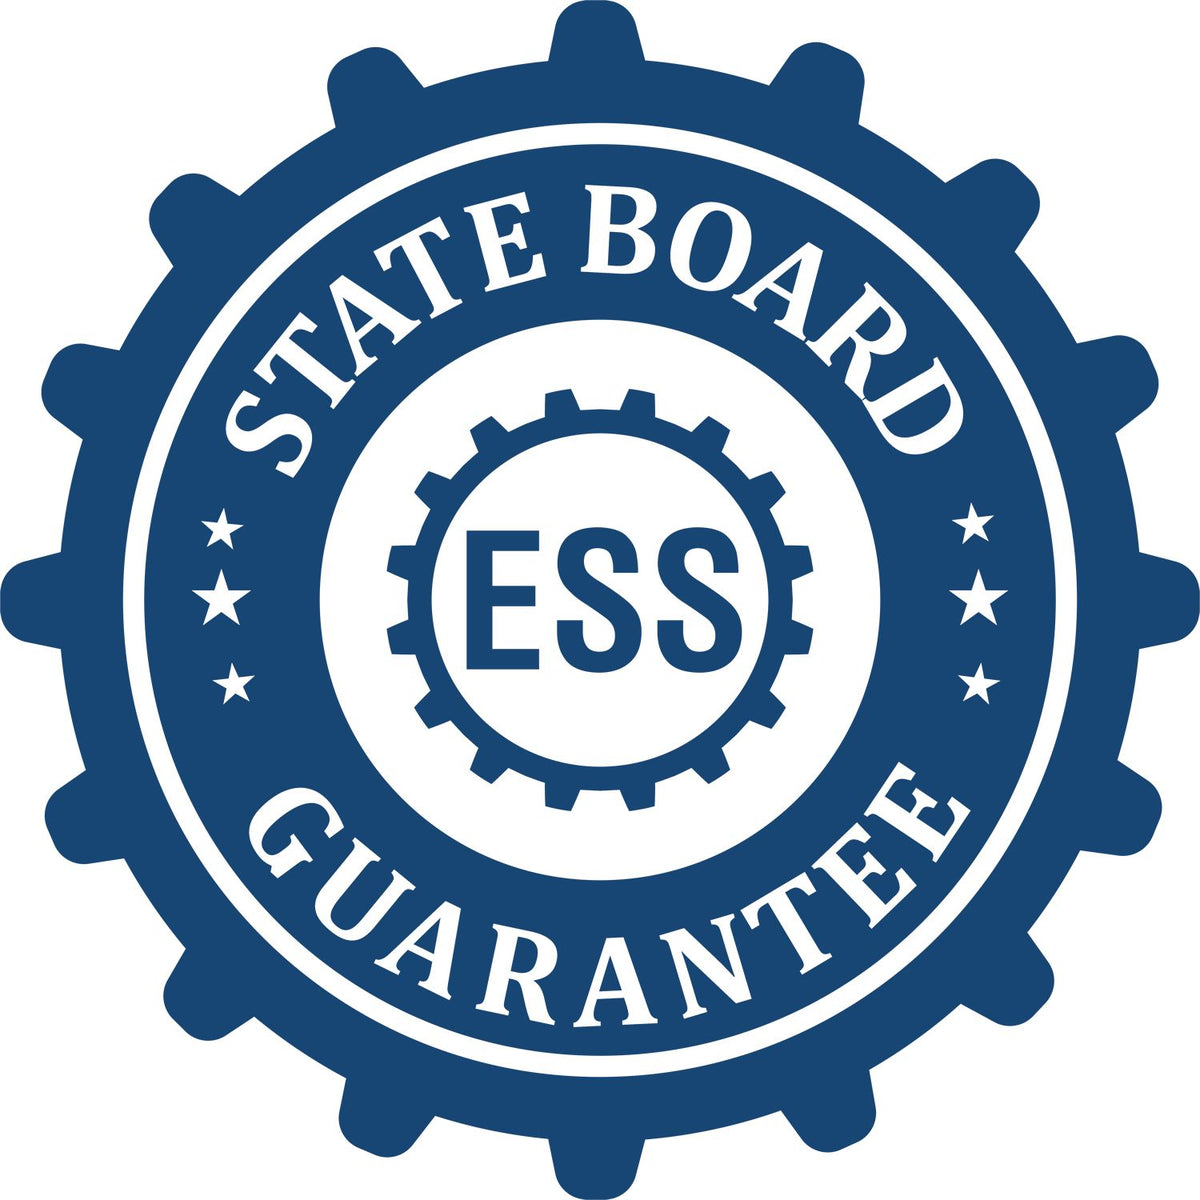 An emblem in a gear shape illustrating a state board guarantee for the Digital Maine PE Stamp and Electronic Seal for Maine Engineer product.